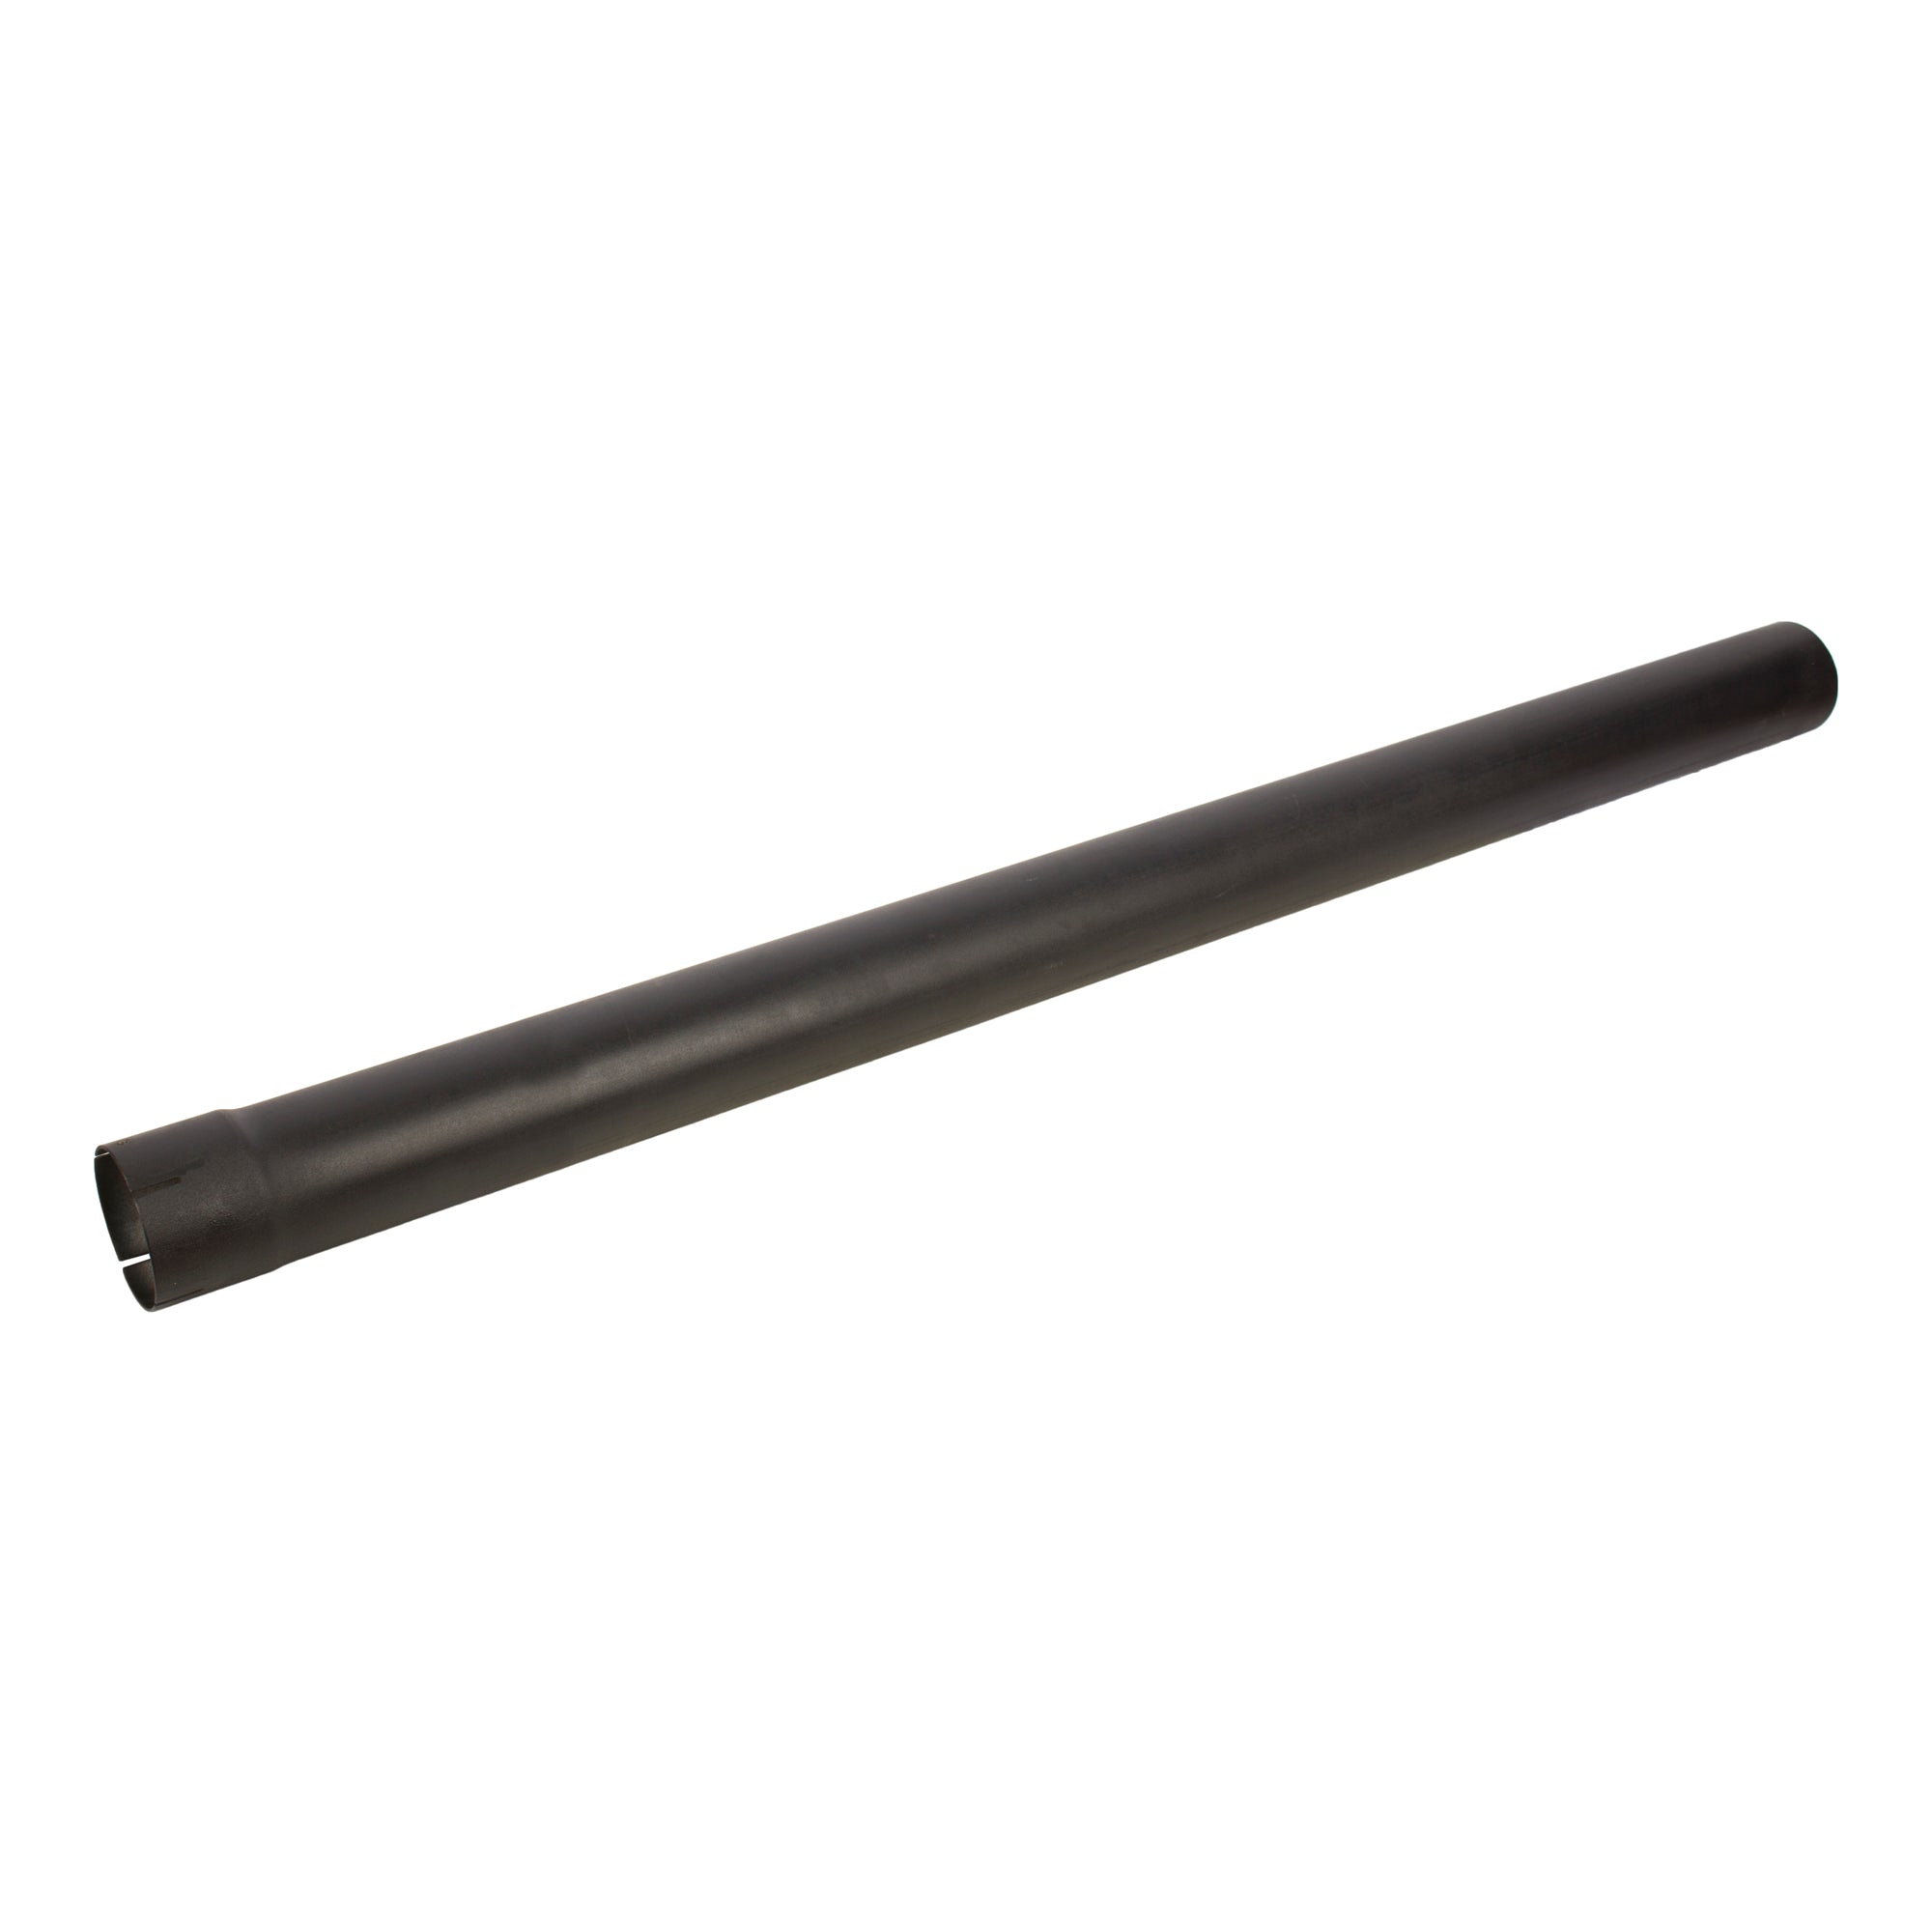 Exhaust Stack Pipe Replacement for Universal 4" x 60", Straight Black